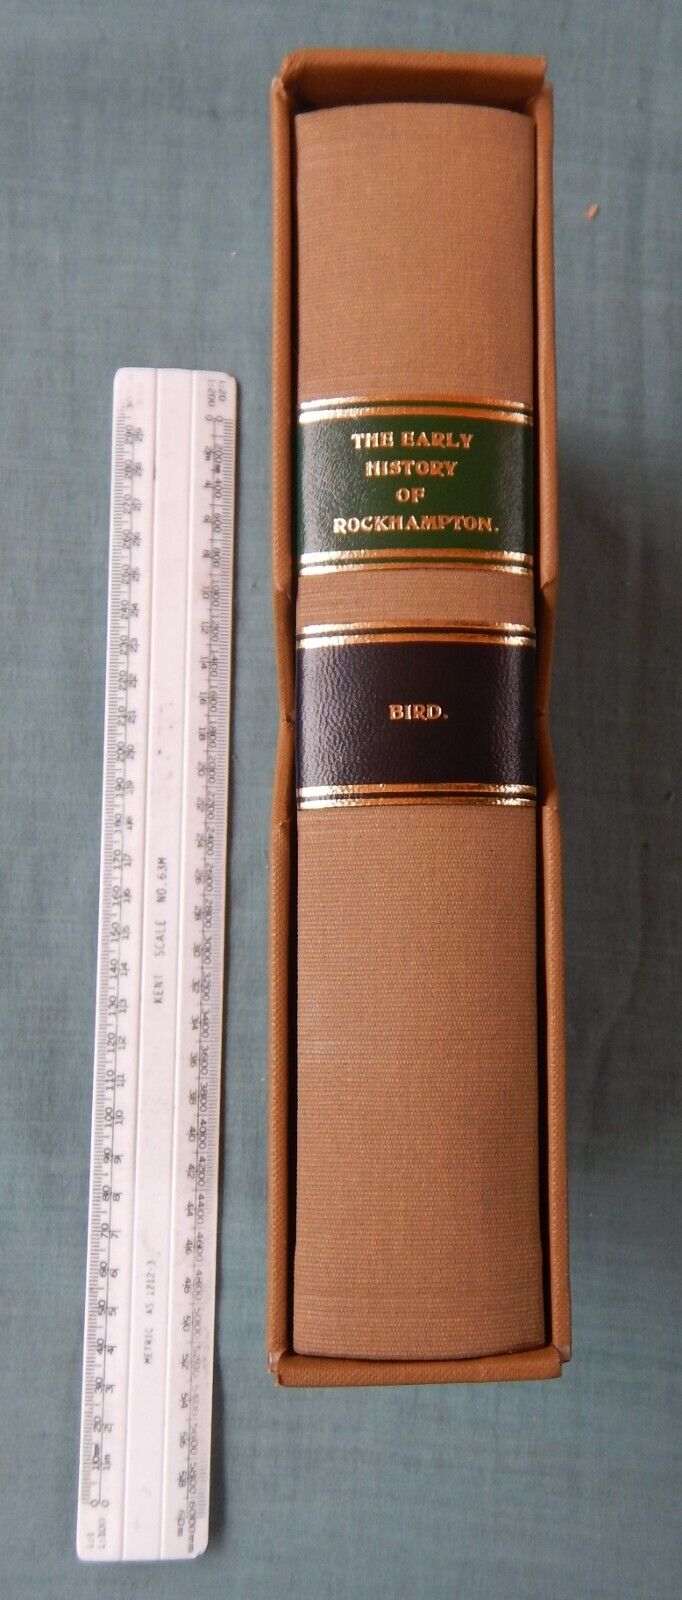 J.T.S. Bird’s, The Early History of Rockhampton (1904), Deluxe Facsimile Edition